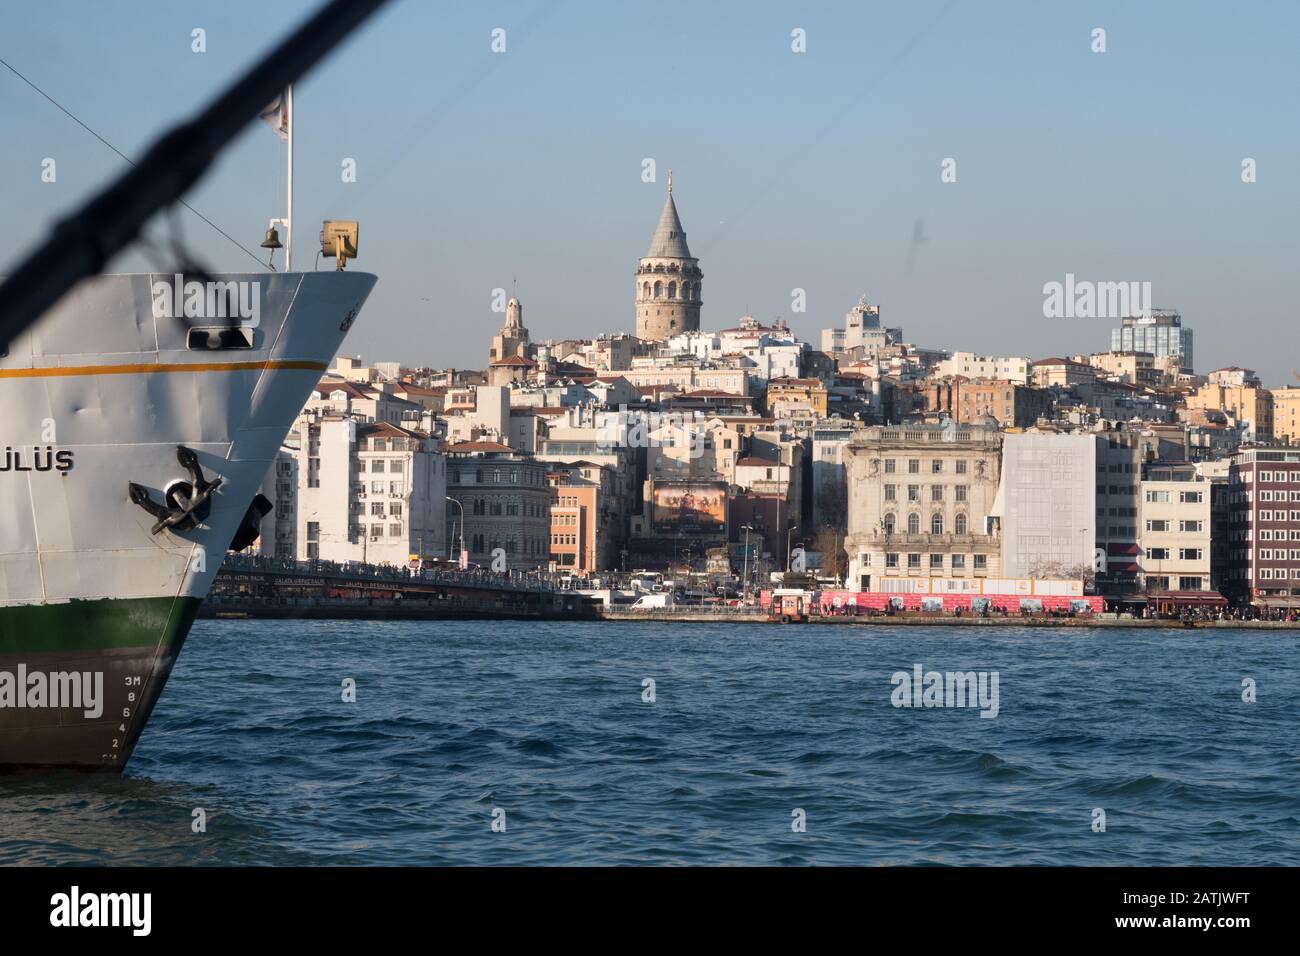 Istanbul, Turkey - Jan 10, 2020: Ferry boat in Golden Horn with Galata Tower in background, Istanbul, Turkey, Europe Stock Photo